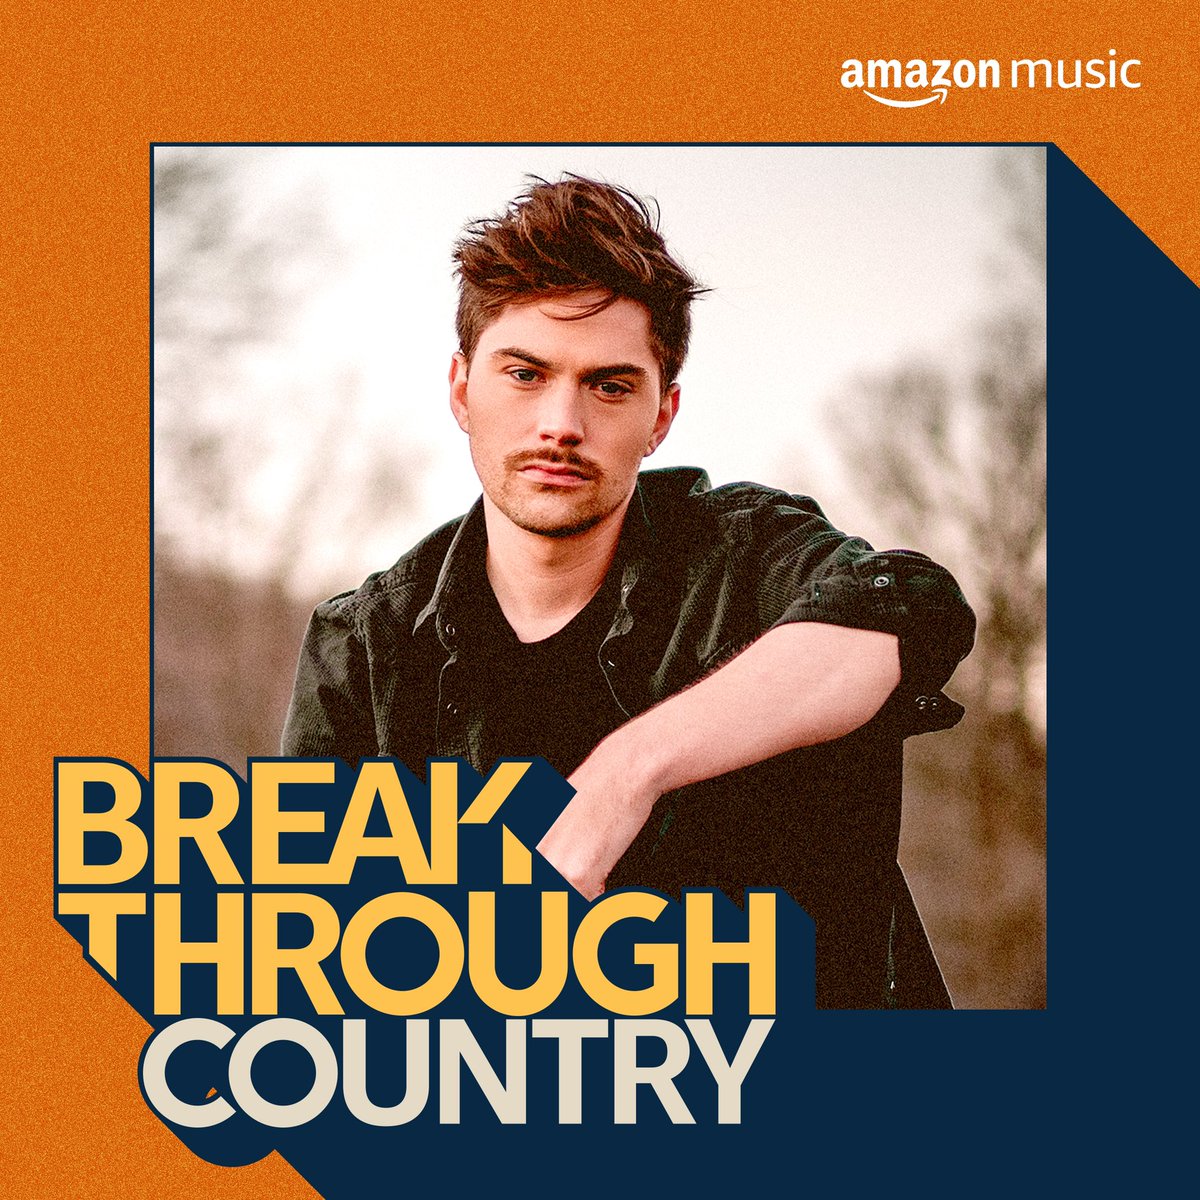 Wow, @AmazonMusic, you sure know how to make a kid from small-town #Ontario feel the love on release day! Thank you for supporting my music & putting me on the cover of #BreakthroughCountry! Go stream my debut album #Unscripted on #AmazonMusic now! Listen: amzn.to/3tuWgtl